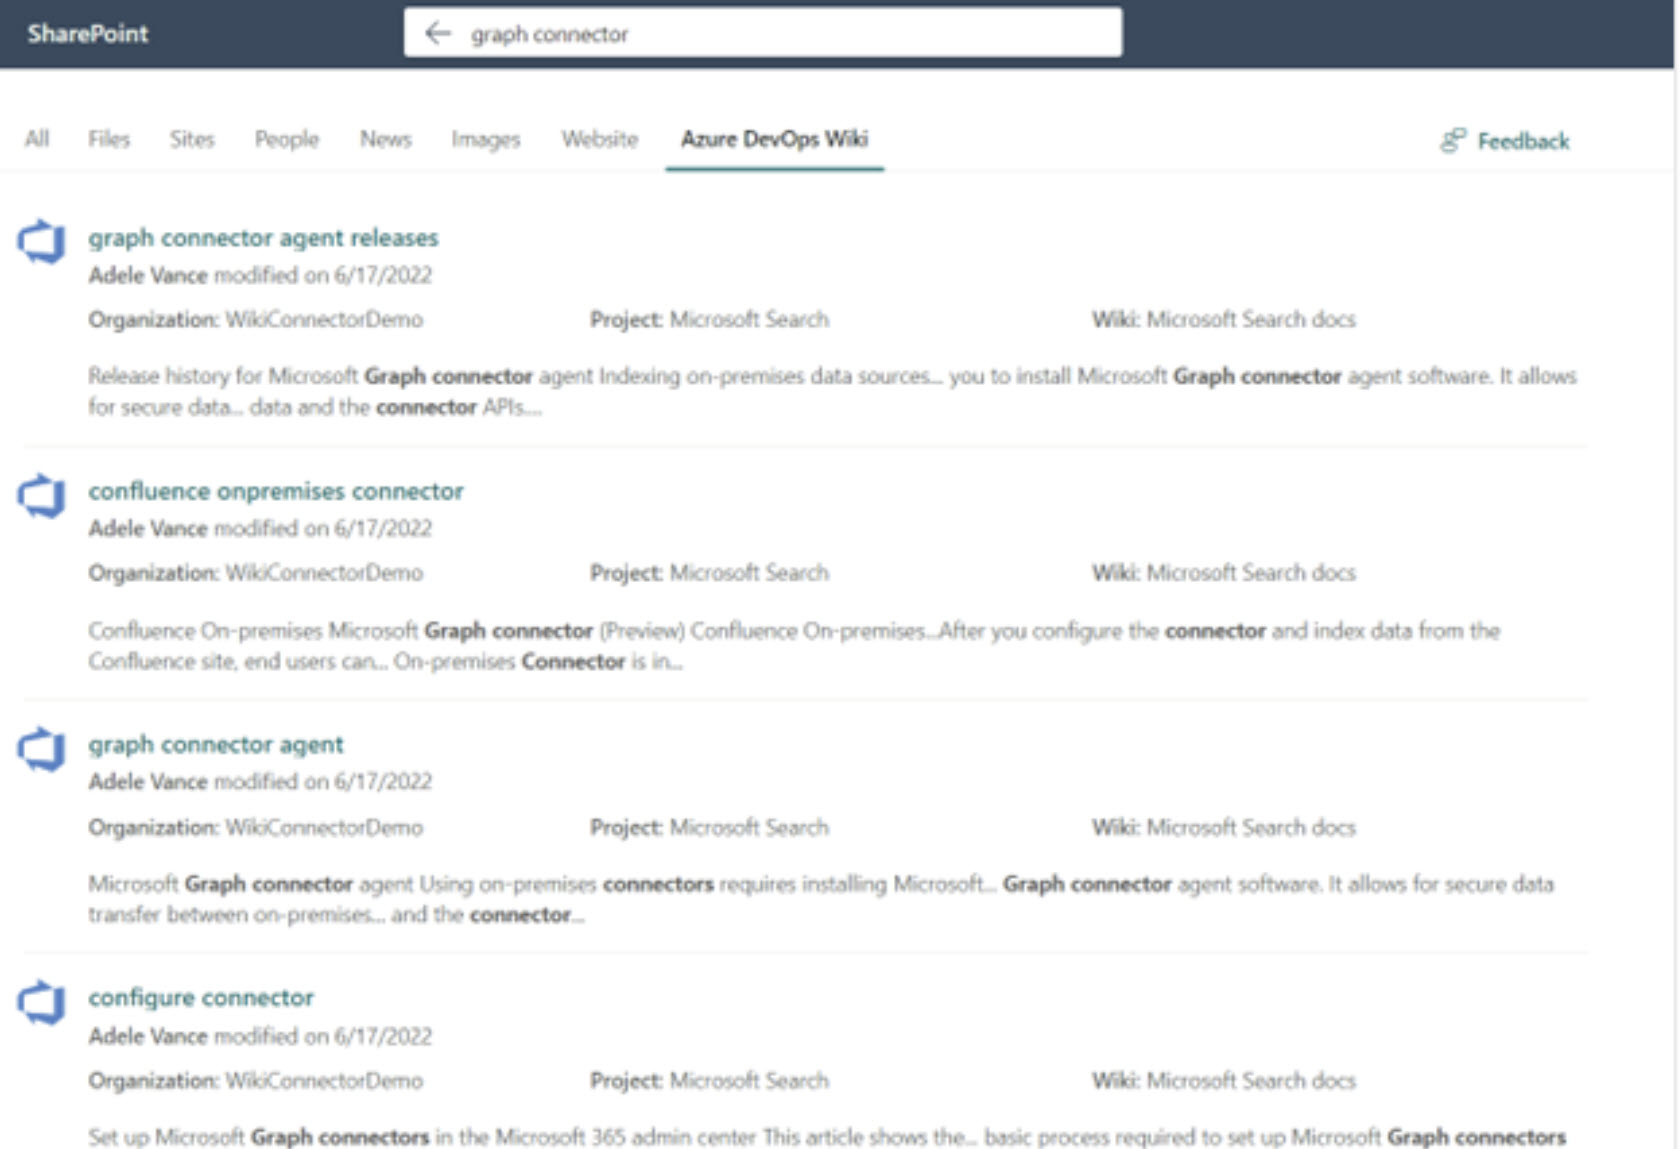 Azure DevOps Wikis in SharePoint search results